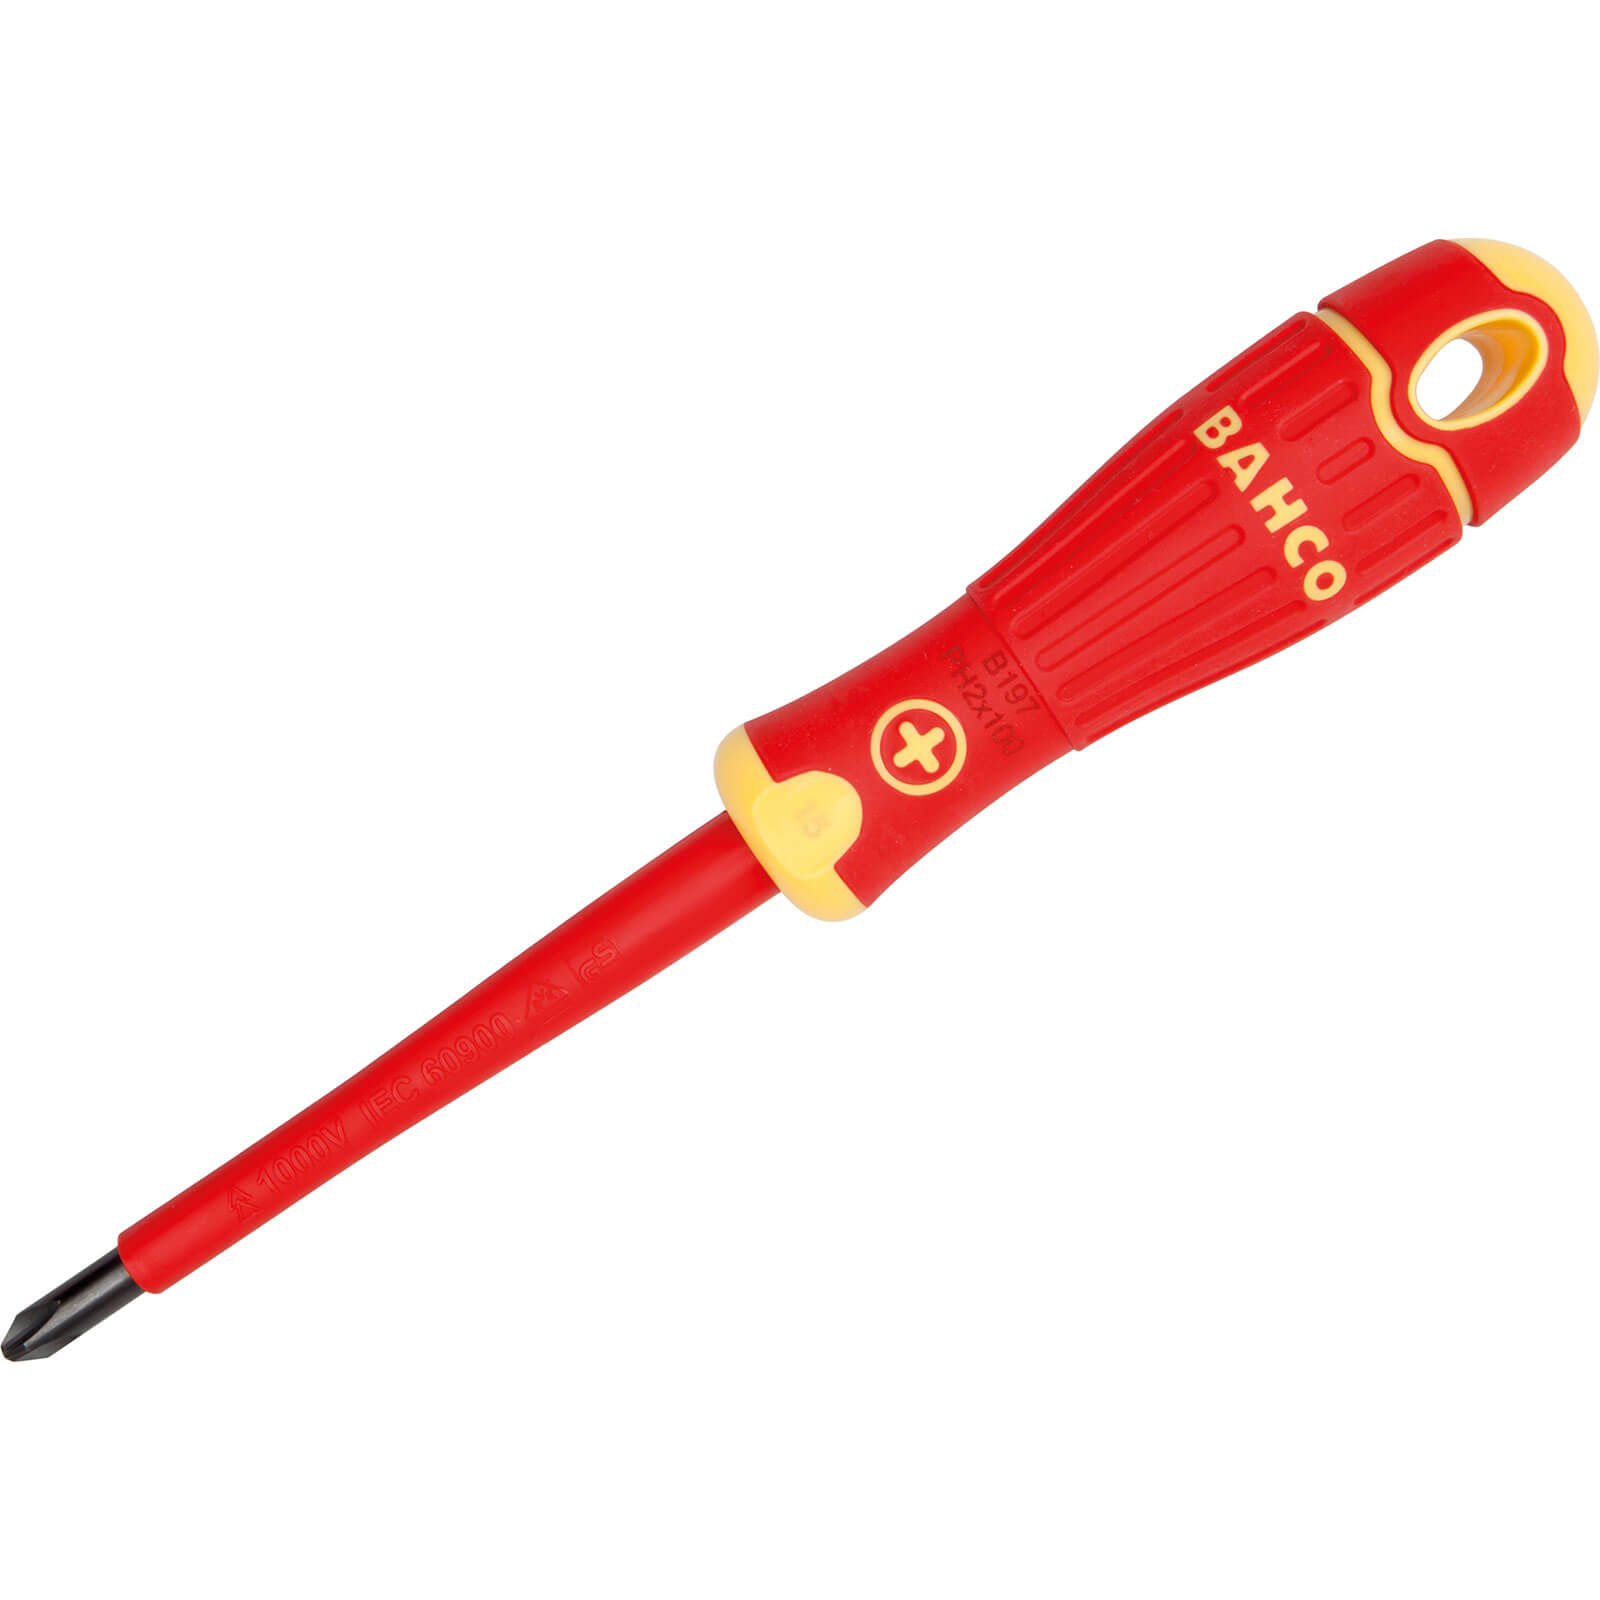 Photo of Bahco Vde Insulated Phillips Screwdriver Ph1 80mm